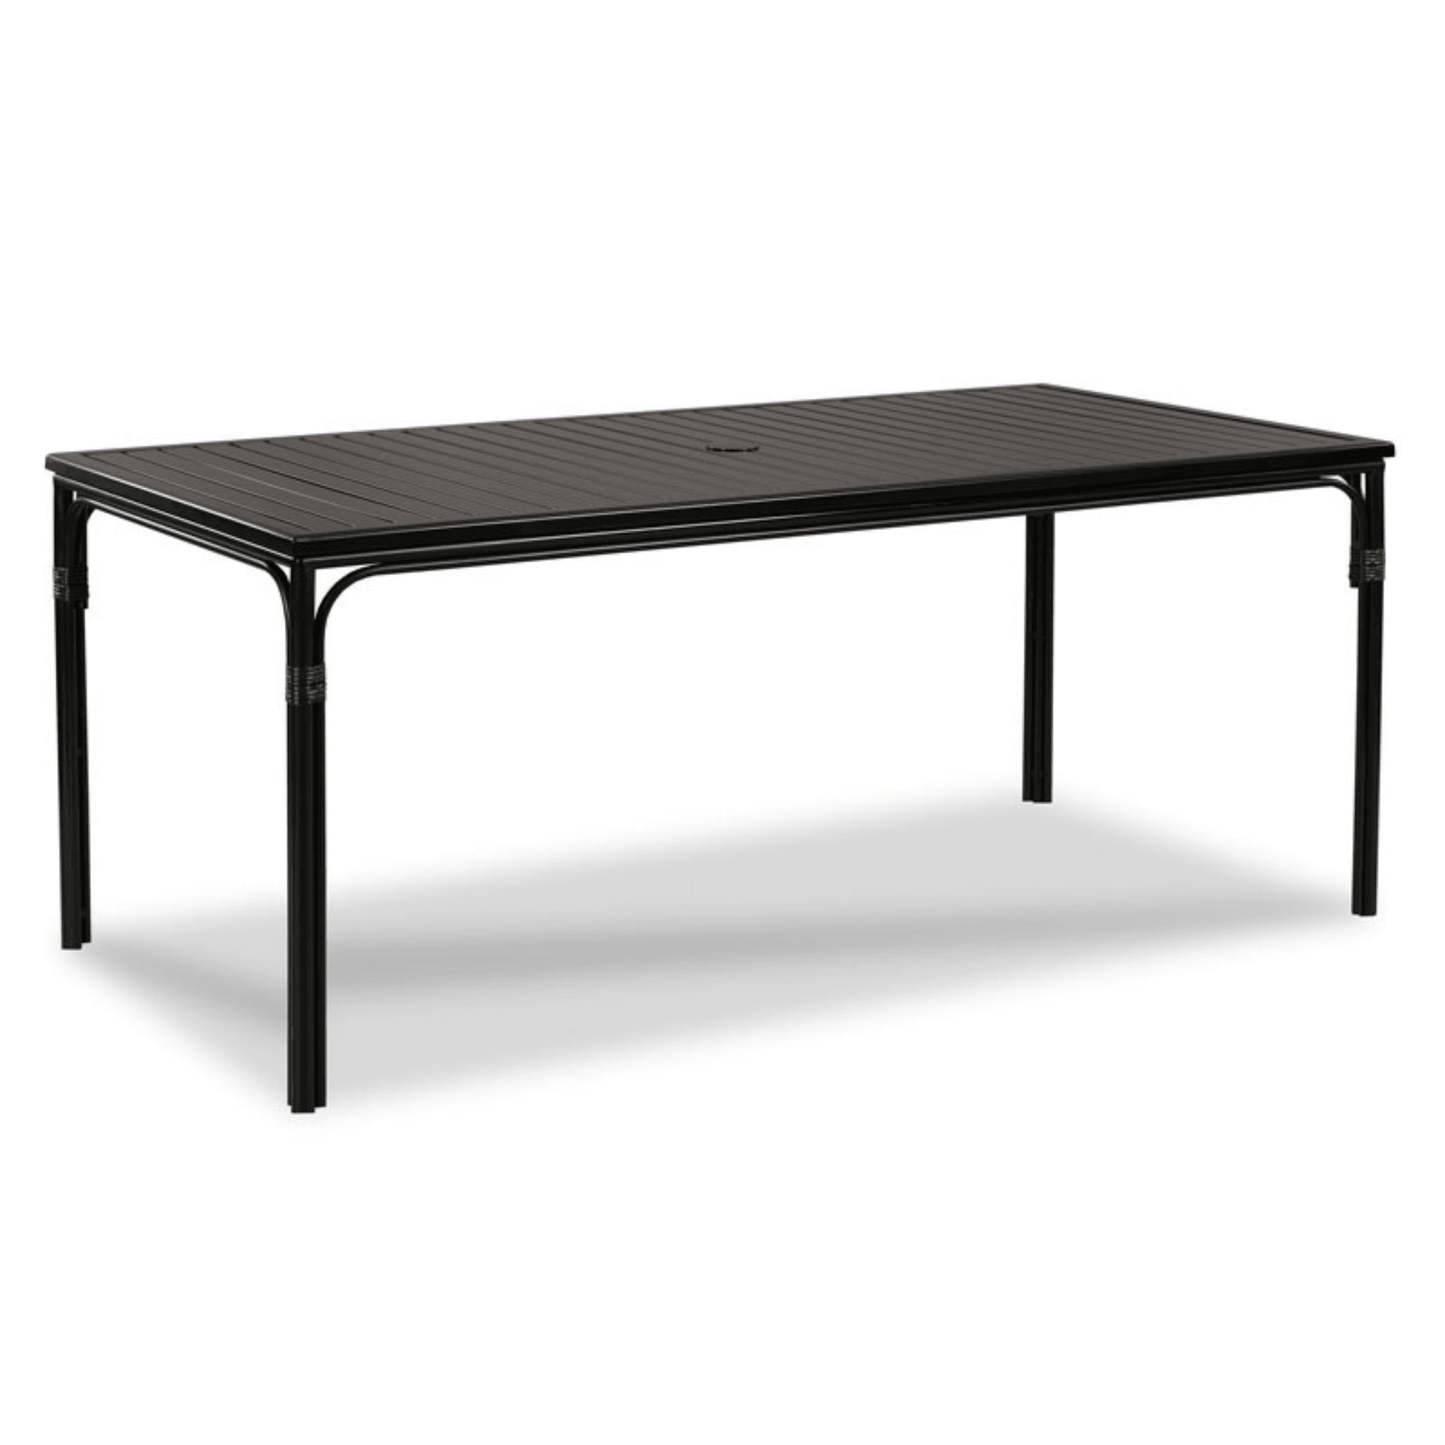 Carlyle Outdoor Dining Table - Fairley Fancy 